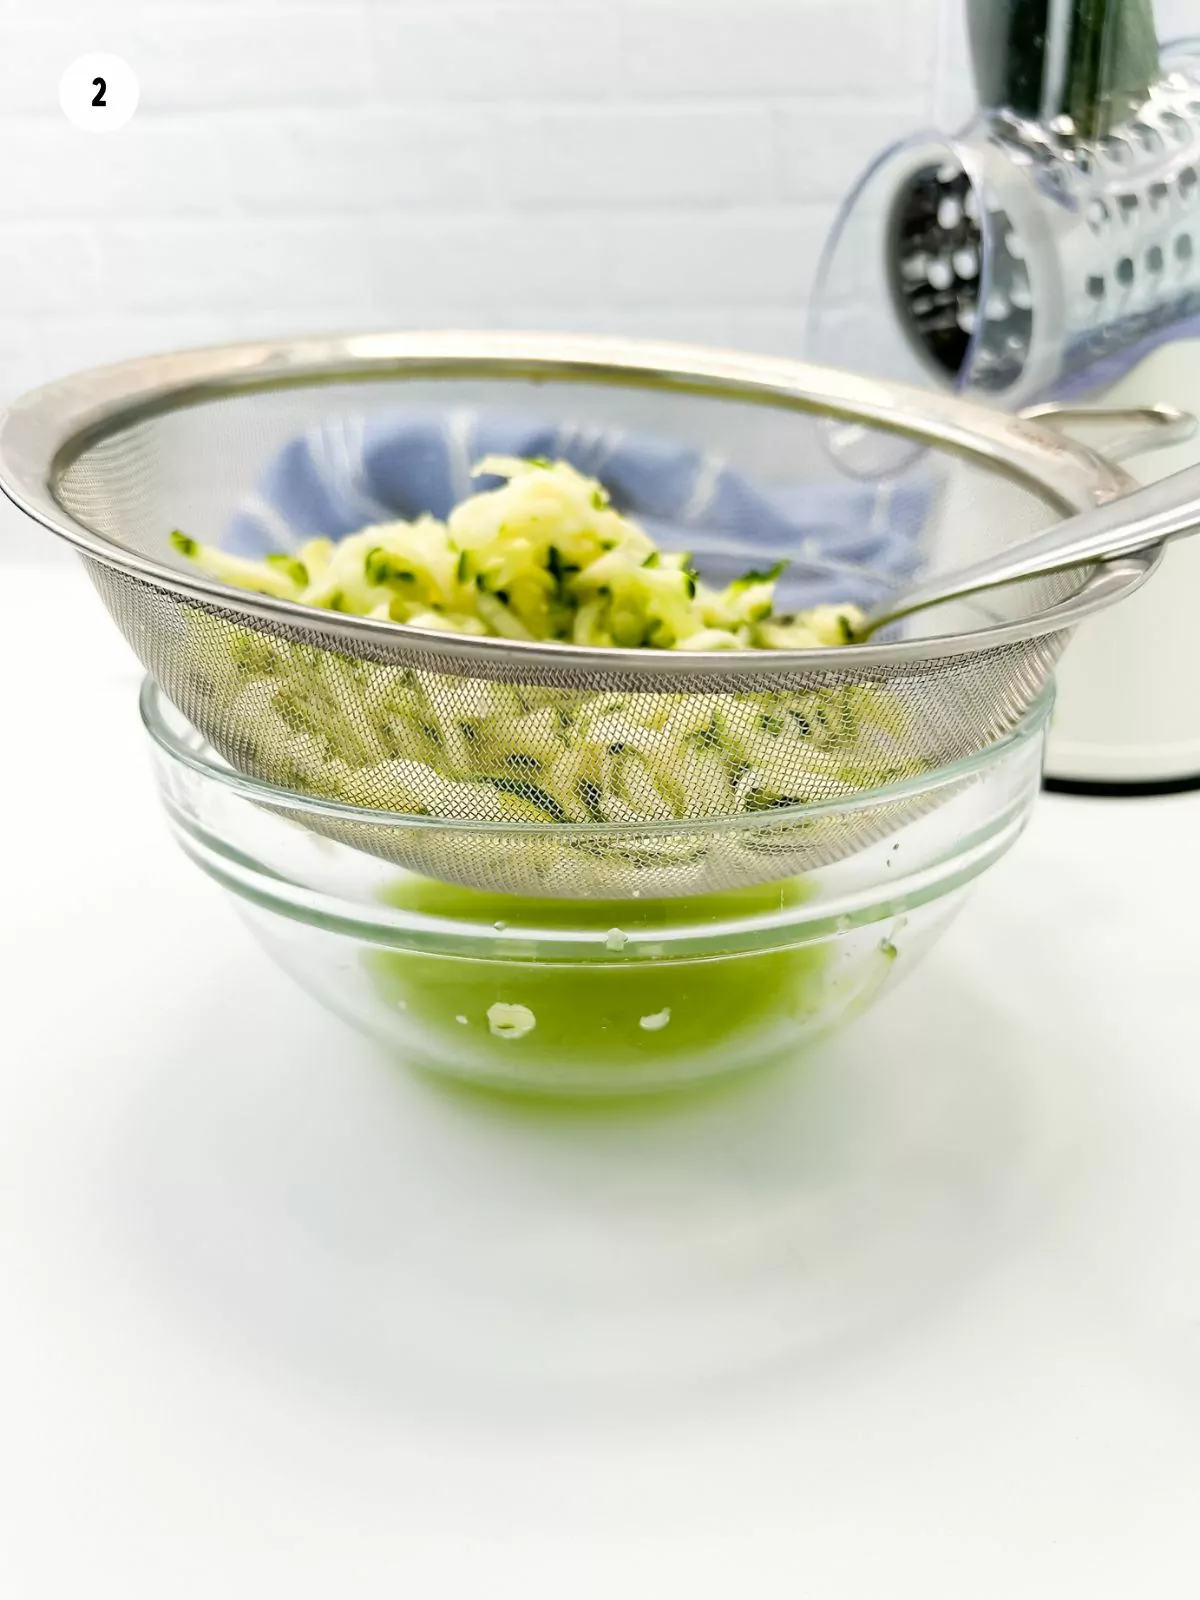 grated zucchini being drained in metal sieve over glass bowl filled with green juice.